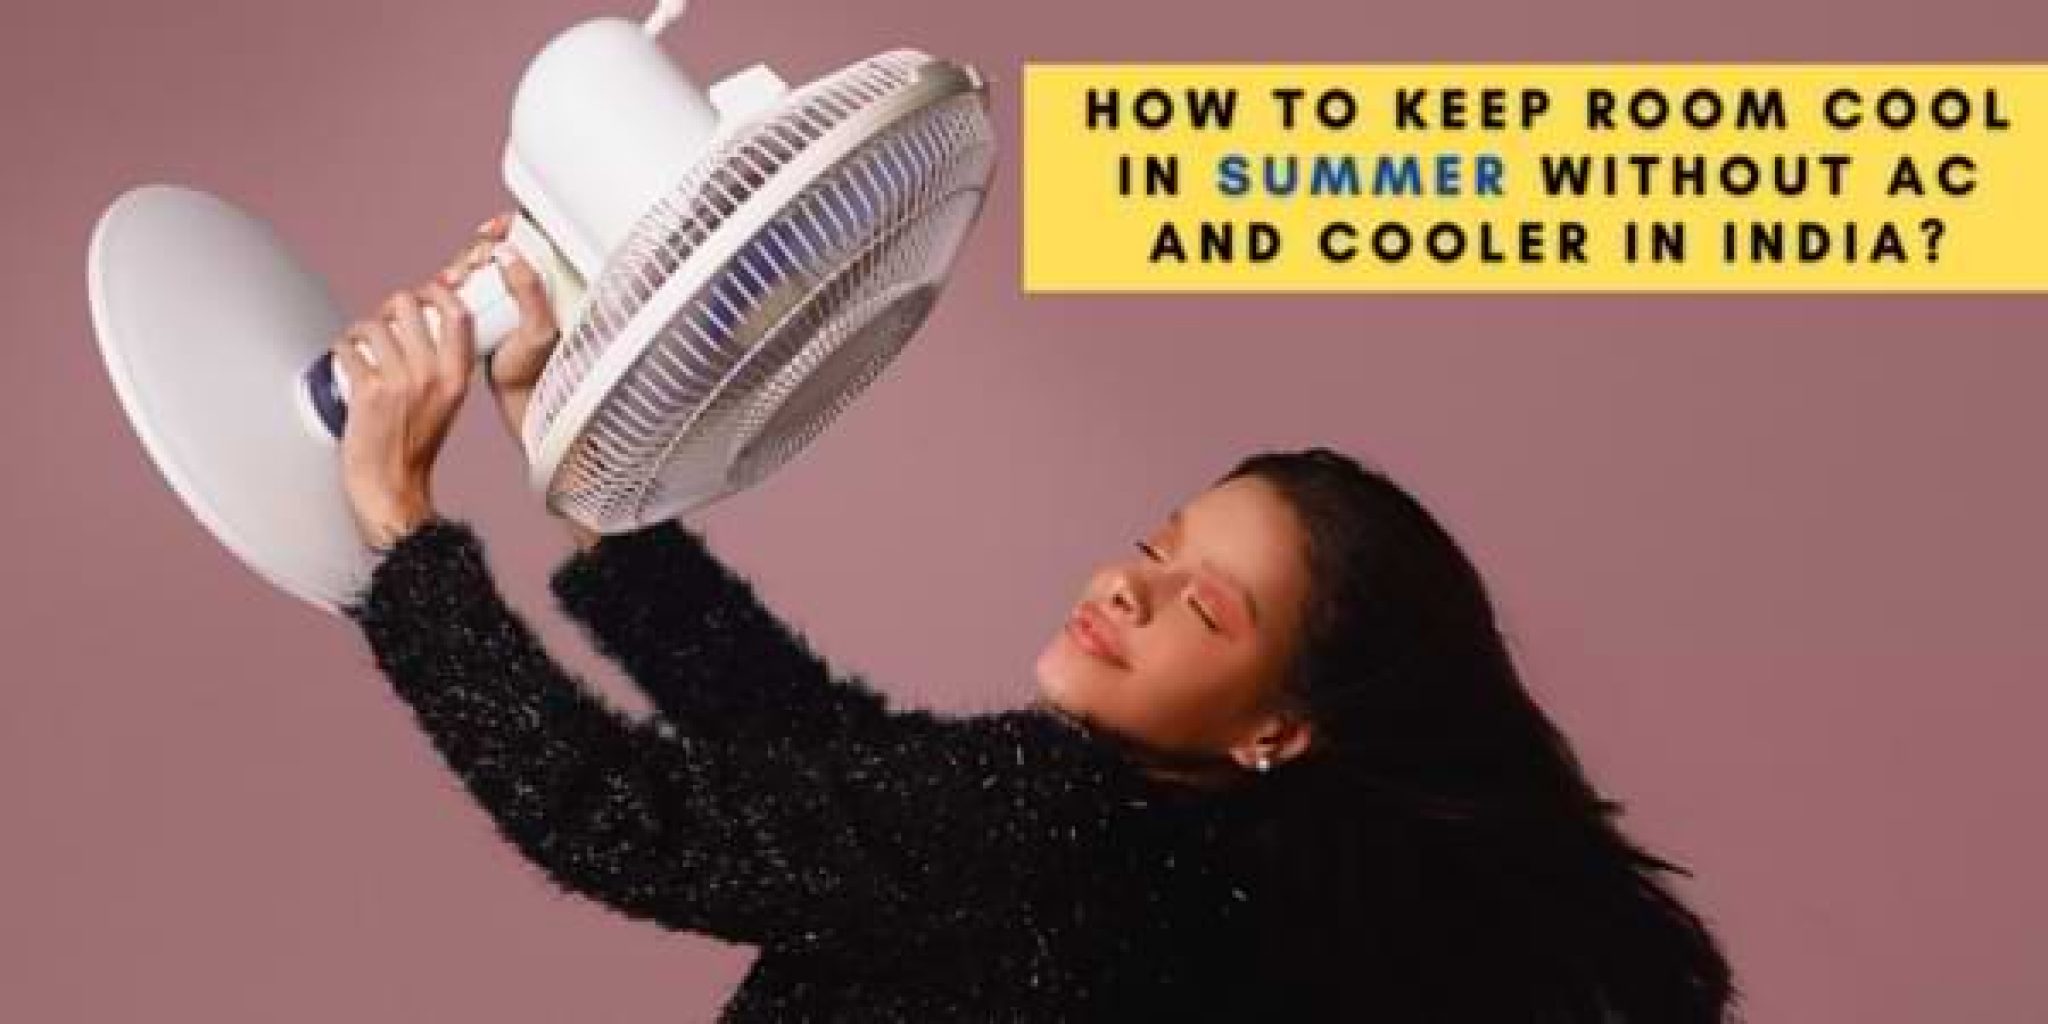 How To Keep Room Cool In Summer Without AC And Cooler In India